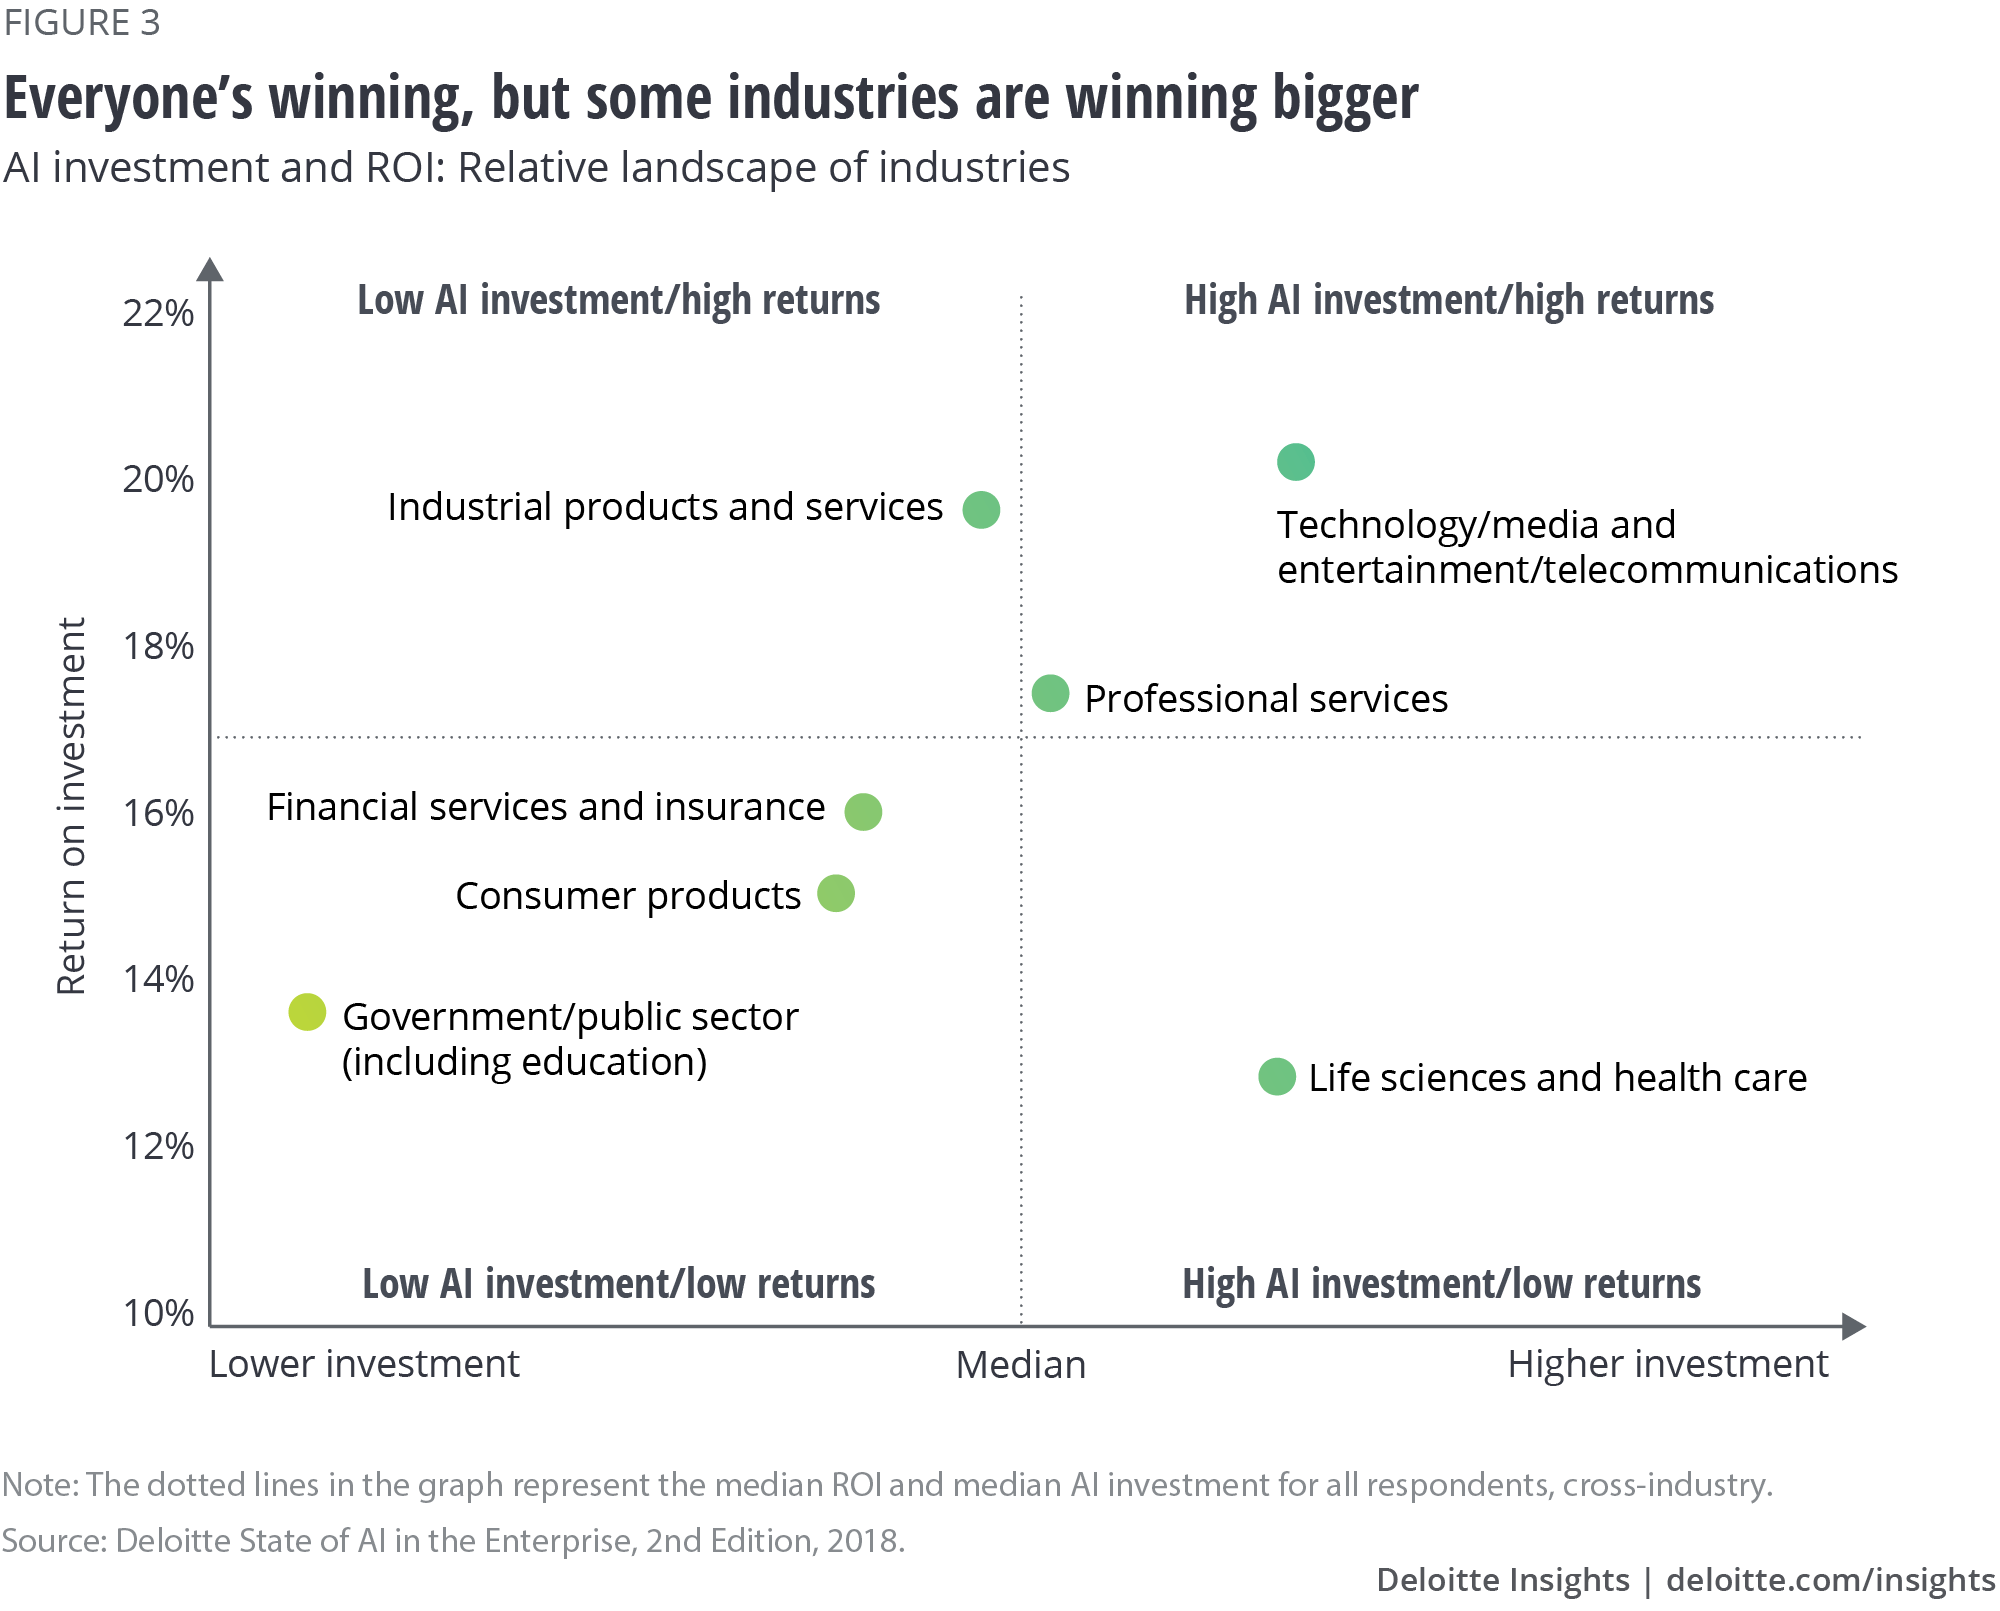 Figure 3: Everyone’s winning, but some industries are winning bigger